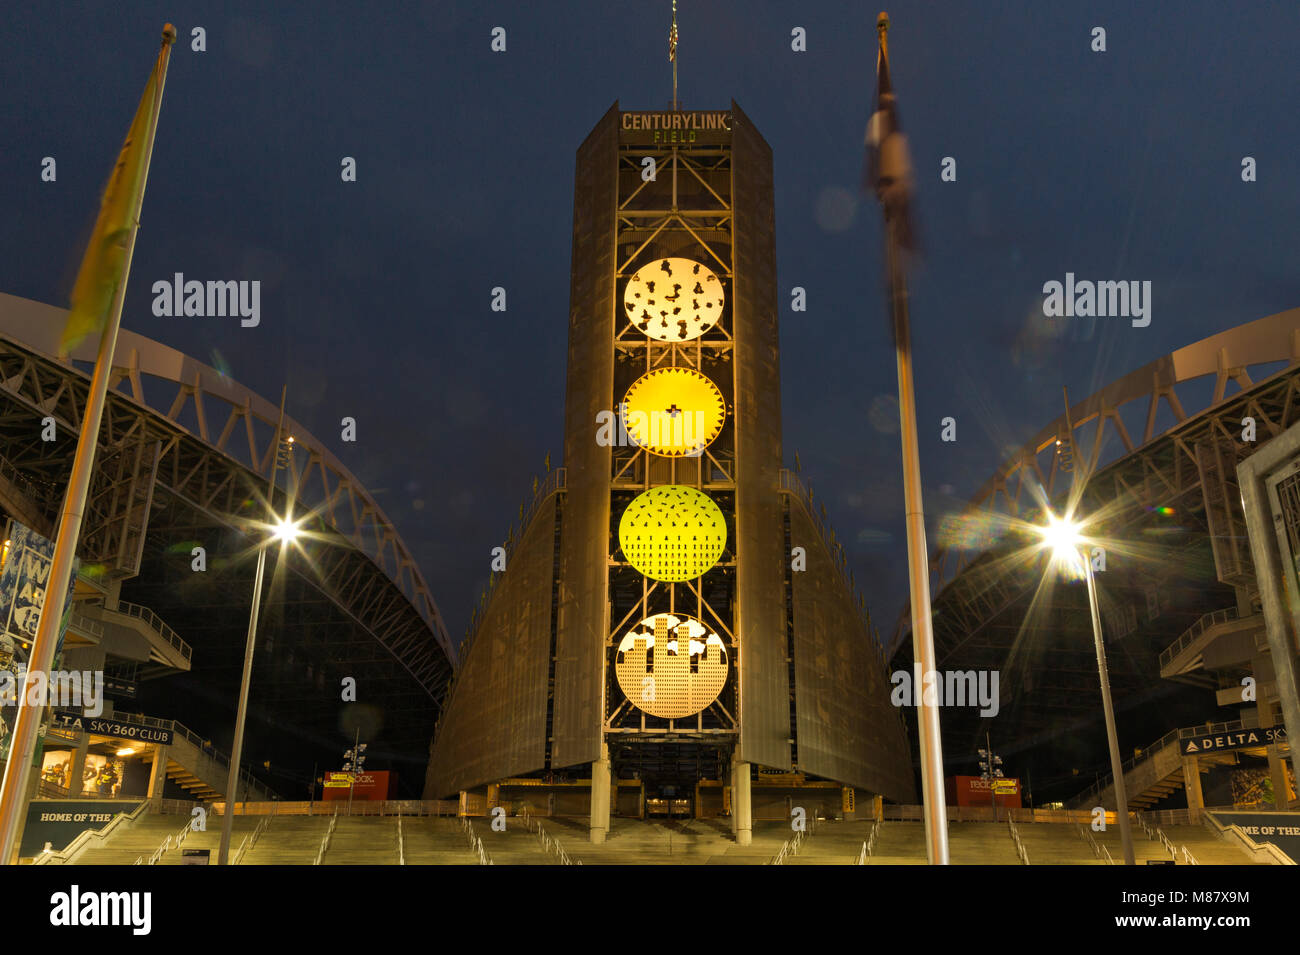 WA13856-00...WASHINGTON - Evening lights at the Tower at CenturyLink Field on a night without a scheduled event in Seattle's Sodo Stadium District. Stock Photo